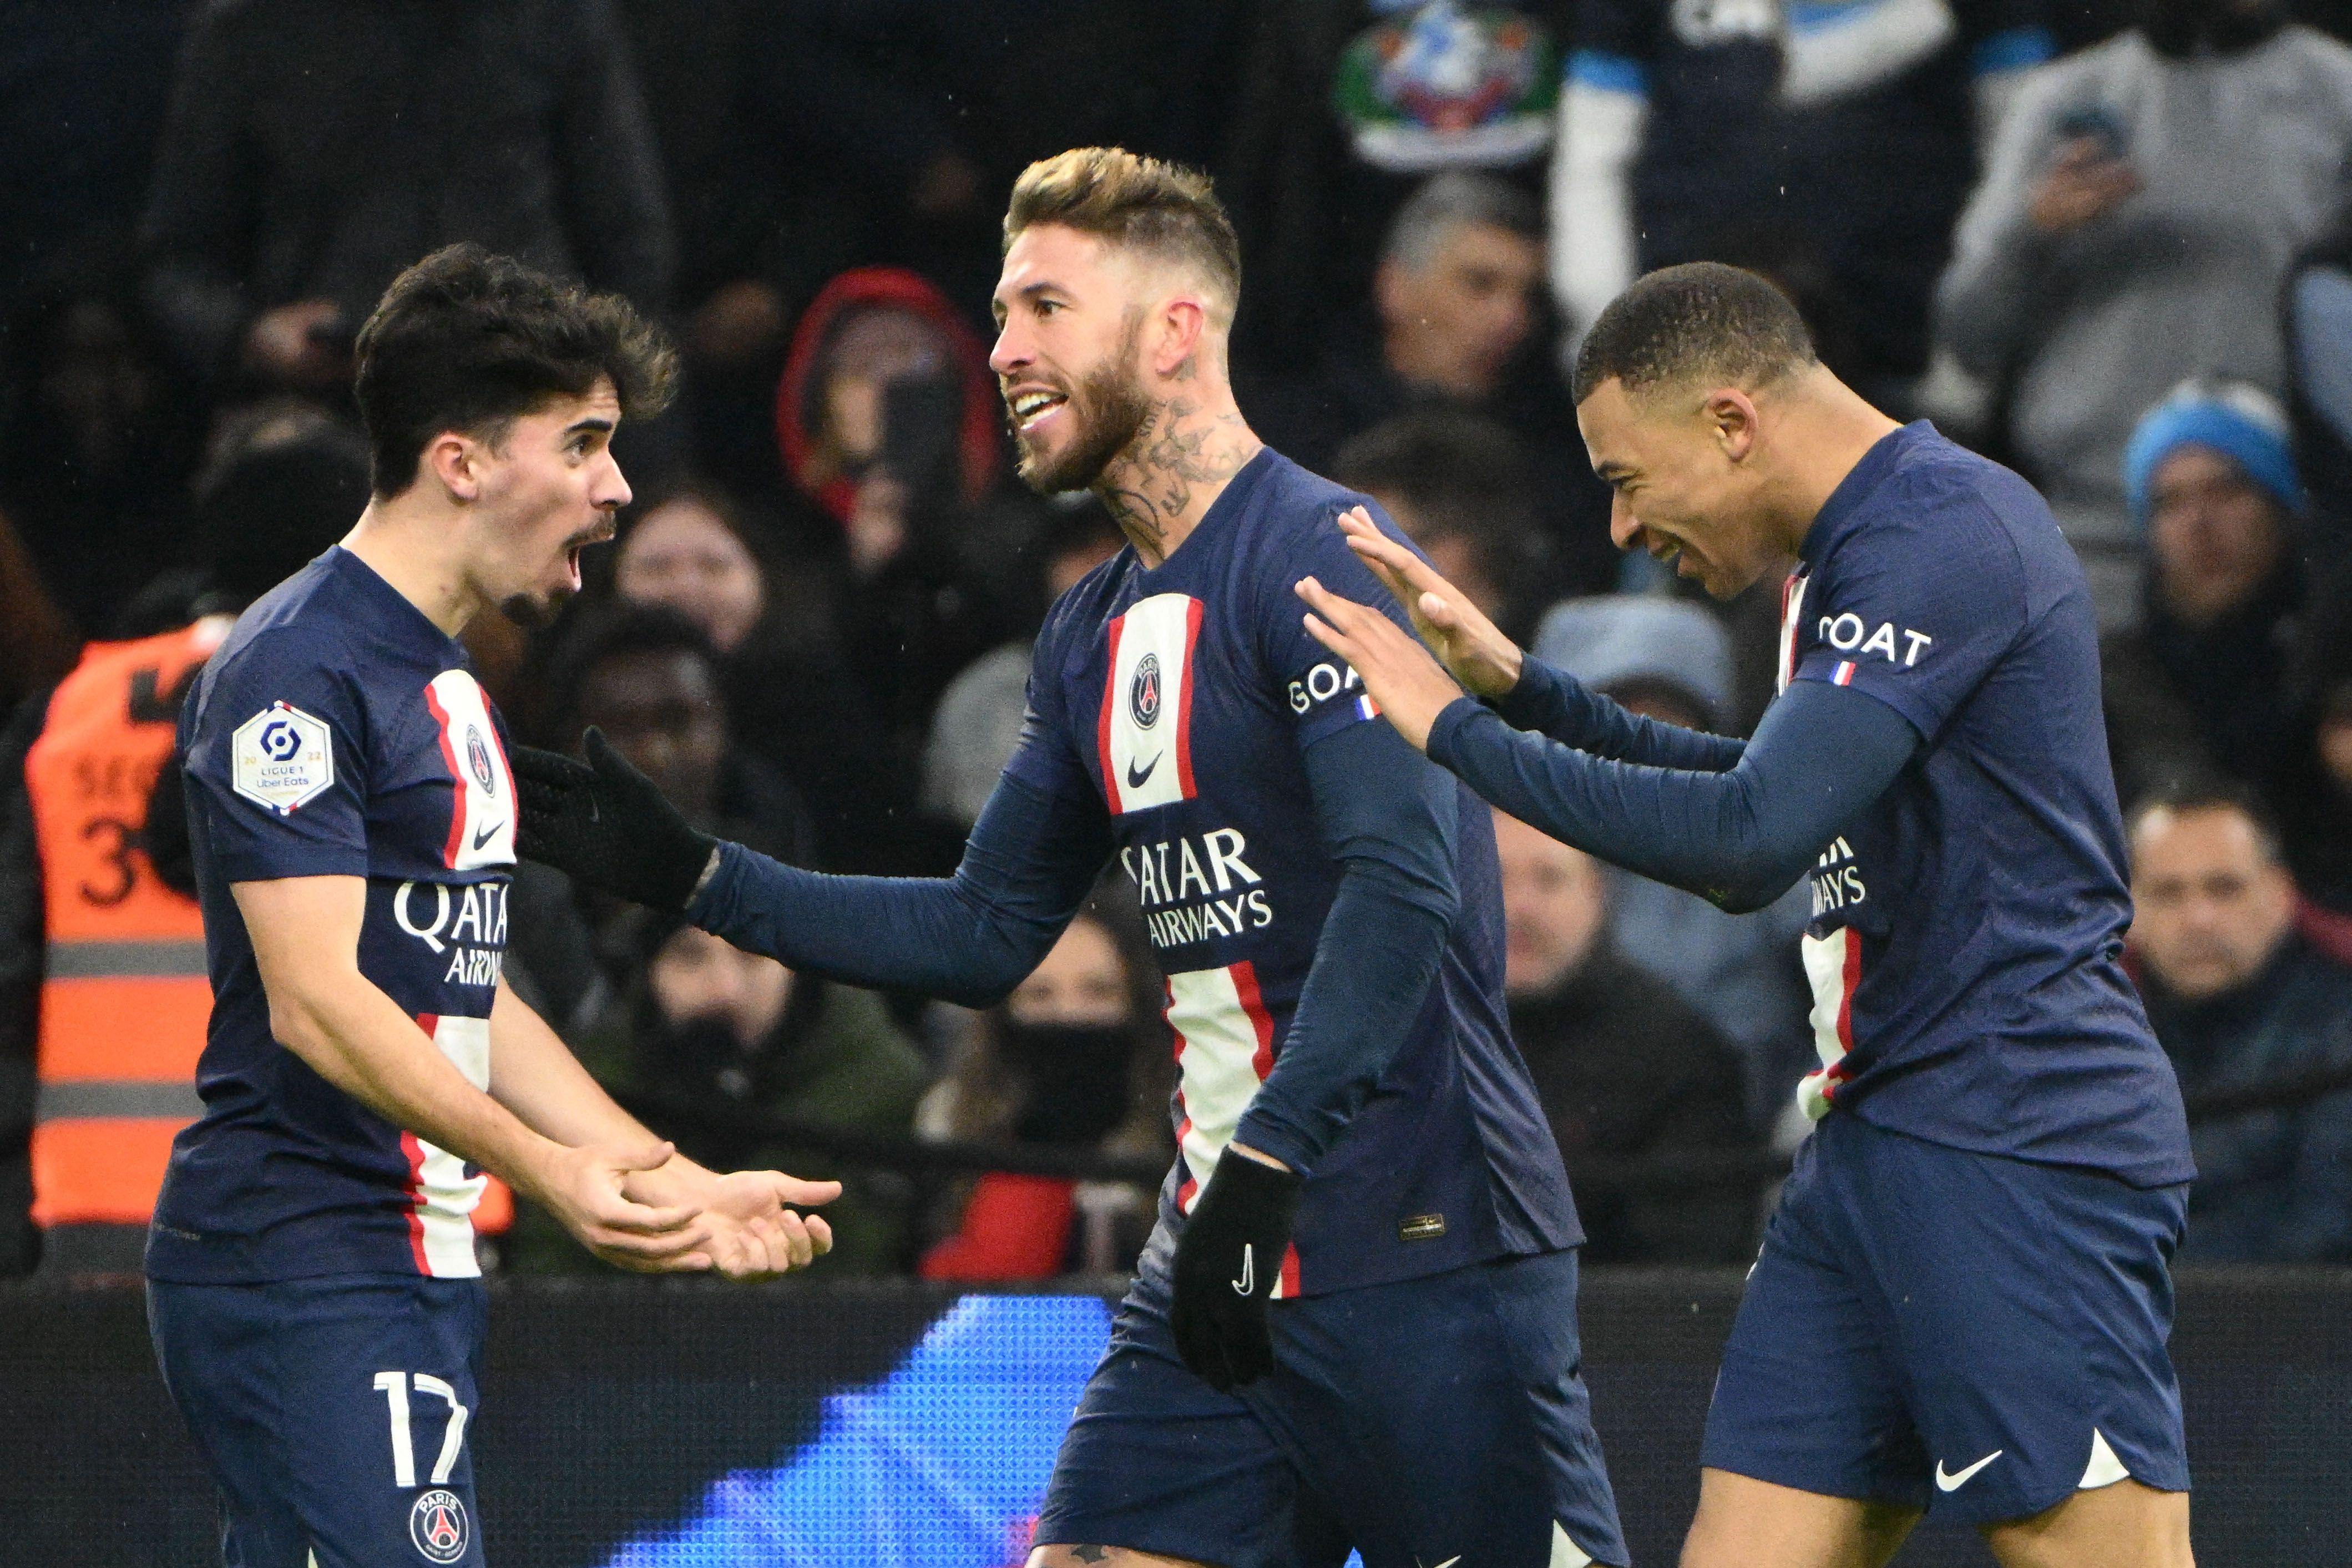 ALL brings Paris Saint-Germain matches to life from the sidelines